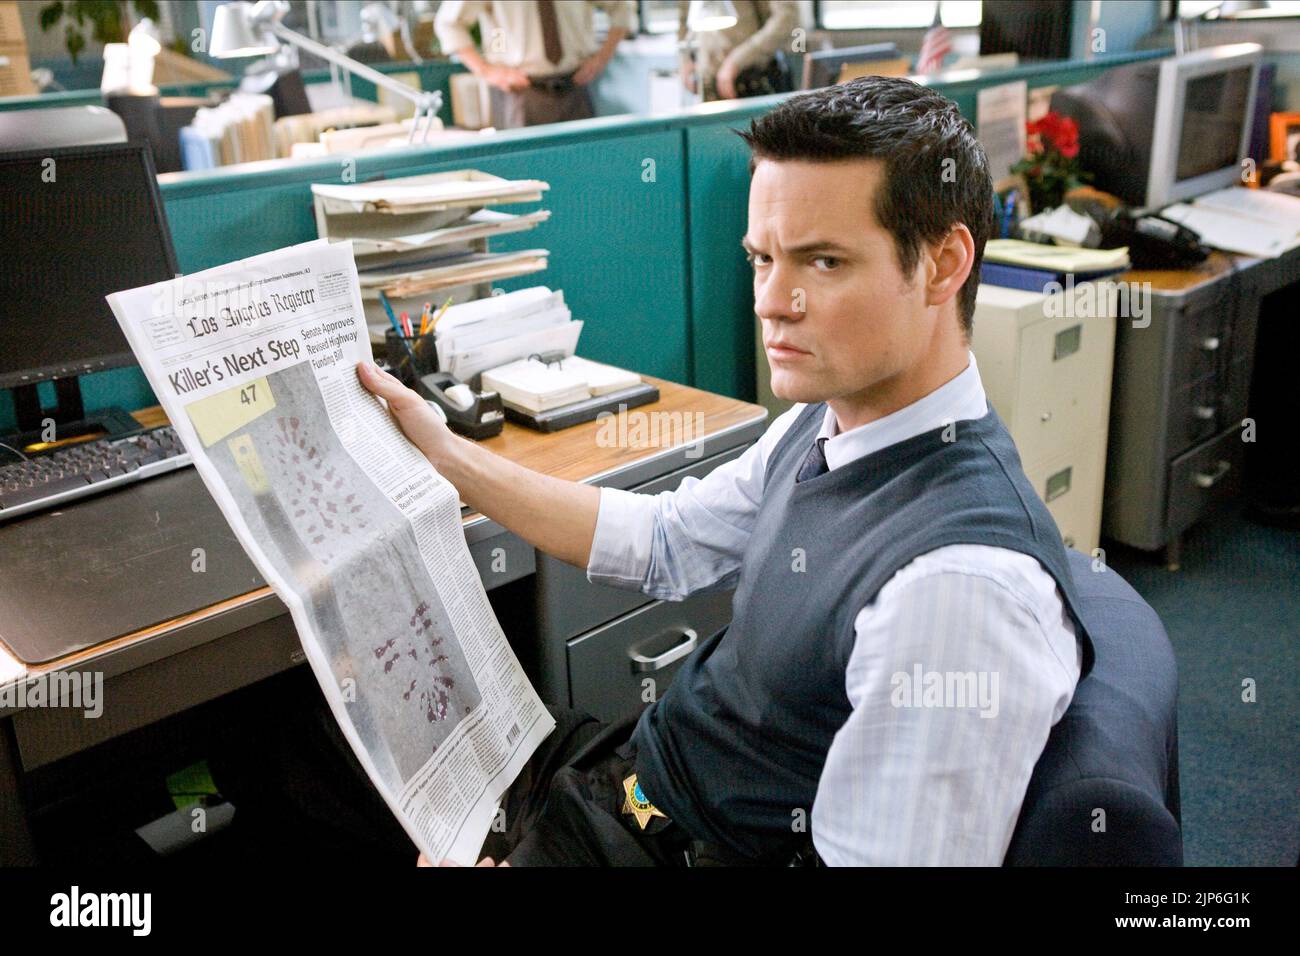 SHANE WEST, THE LODGER, 2009 Stock Photo